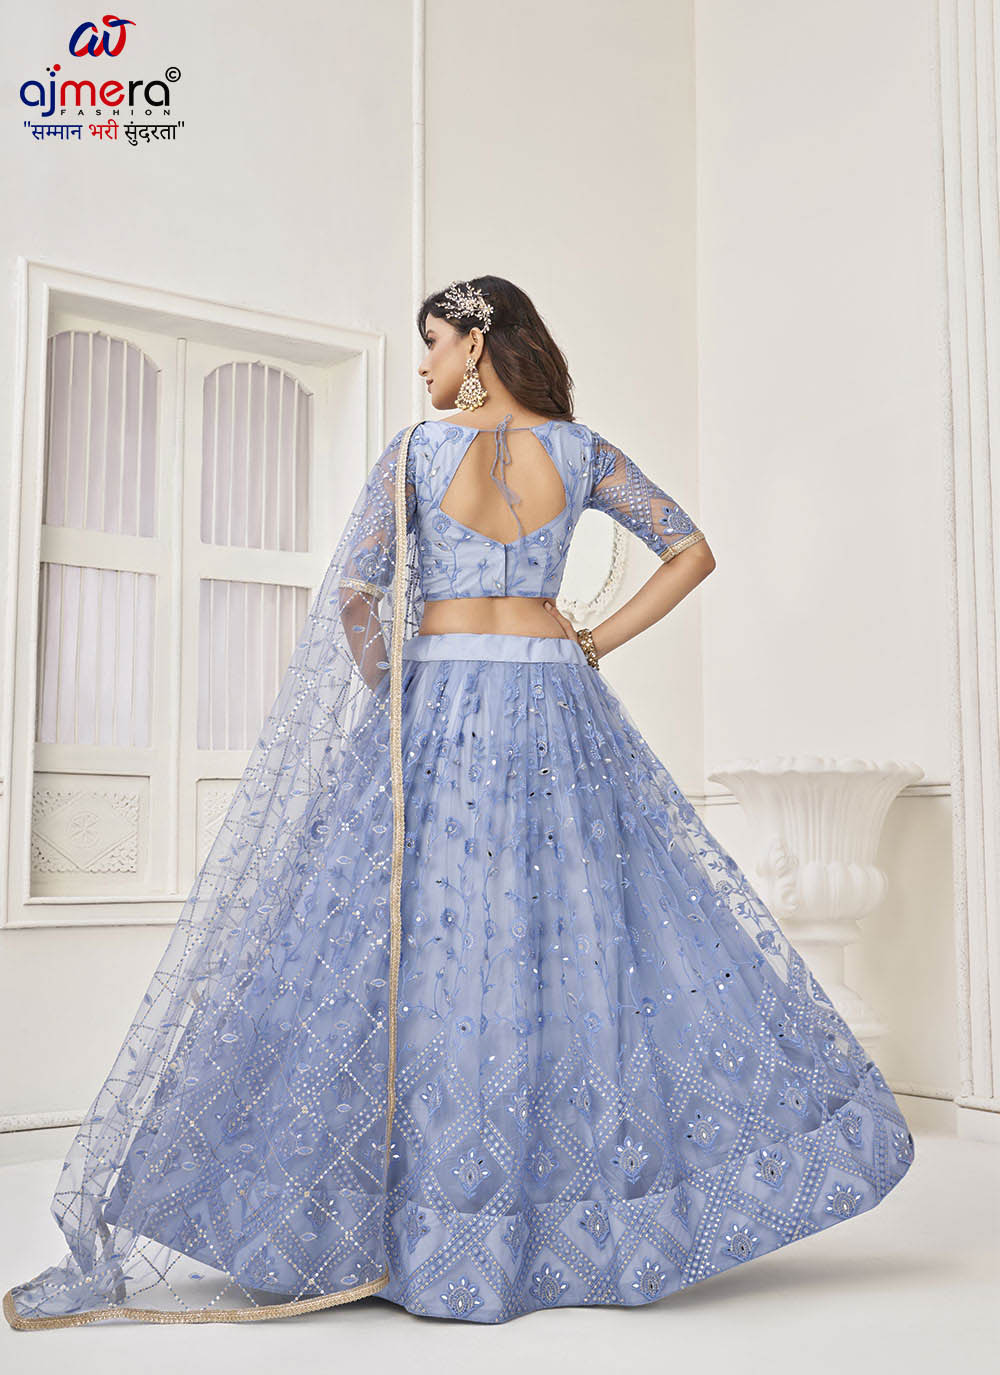 Net Pair Lehnga (2) Manufacturers, Suppliers in Kanpur